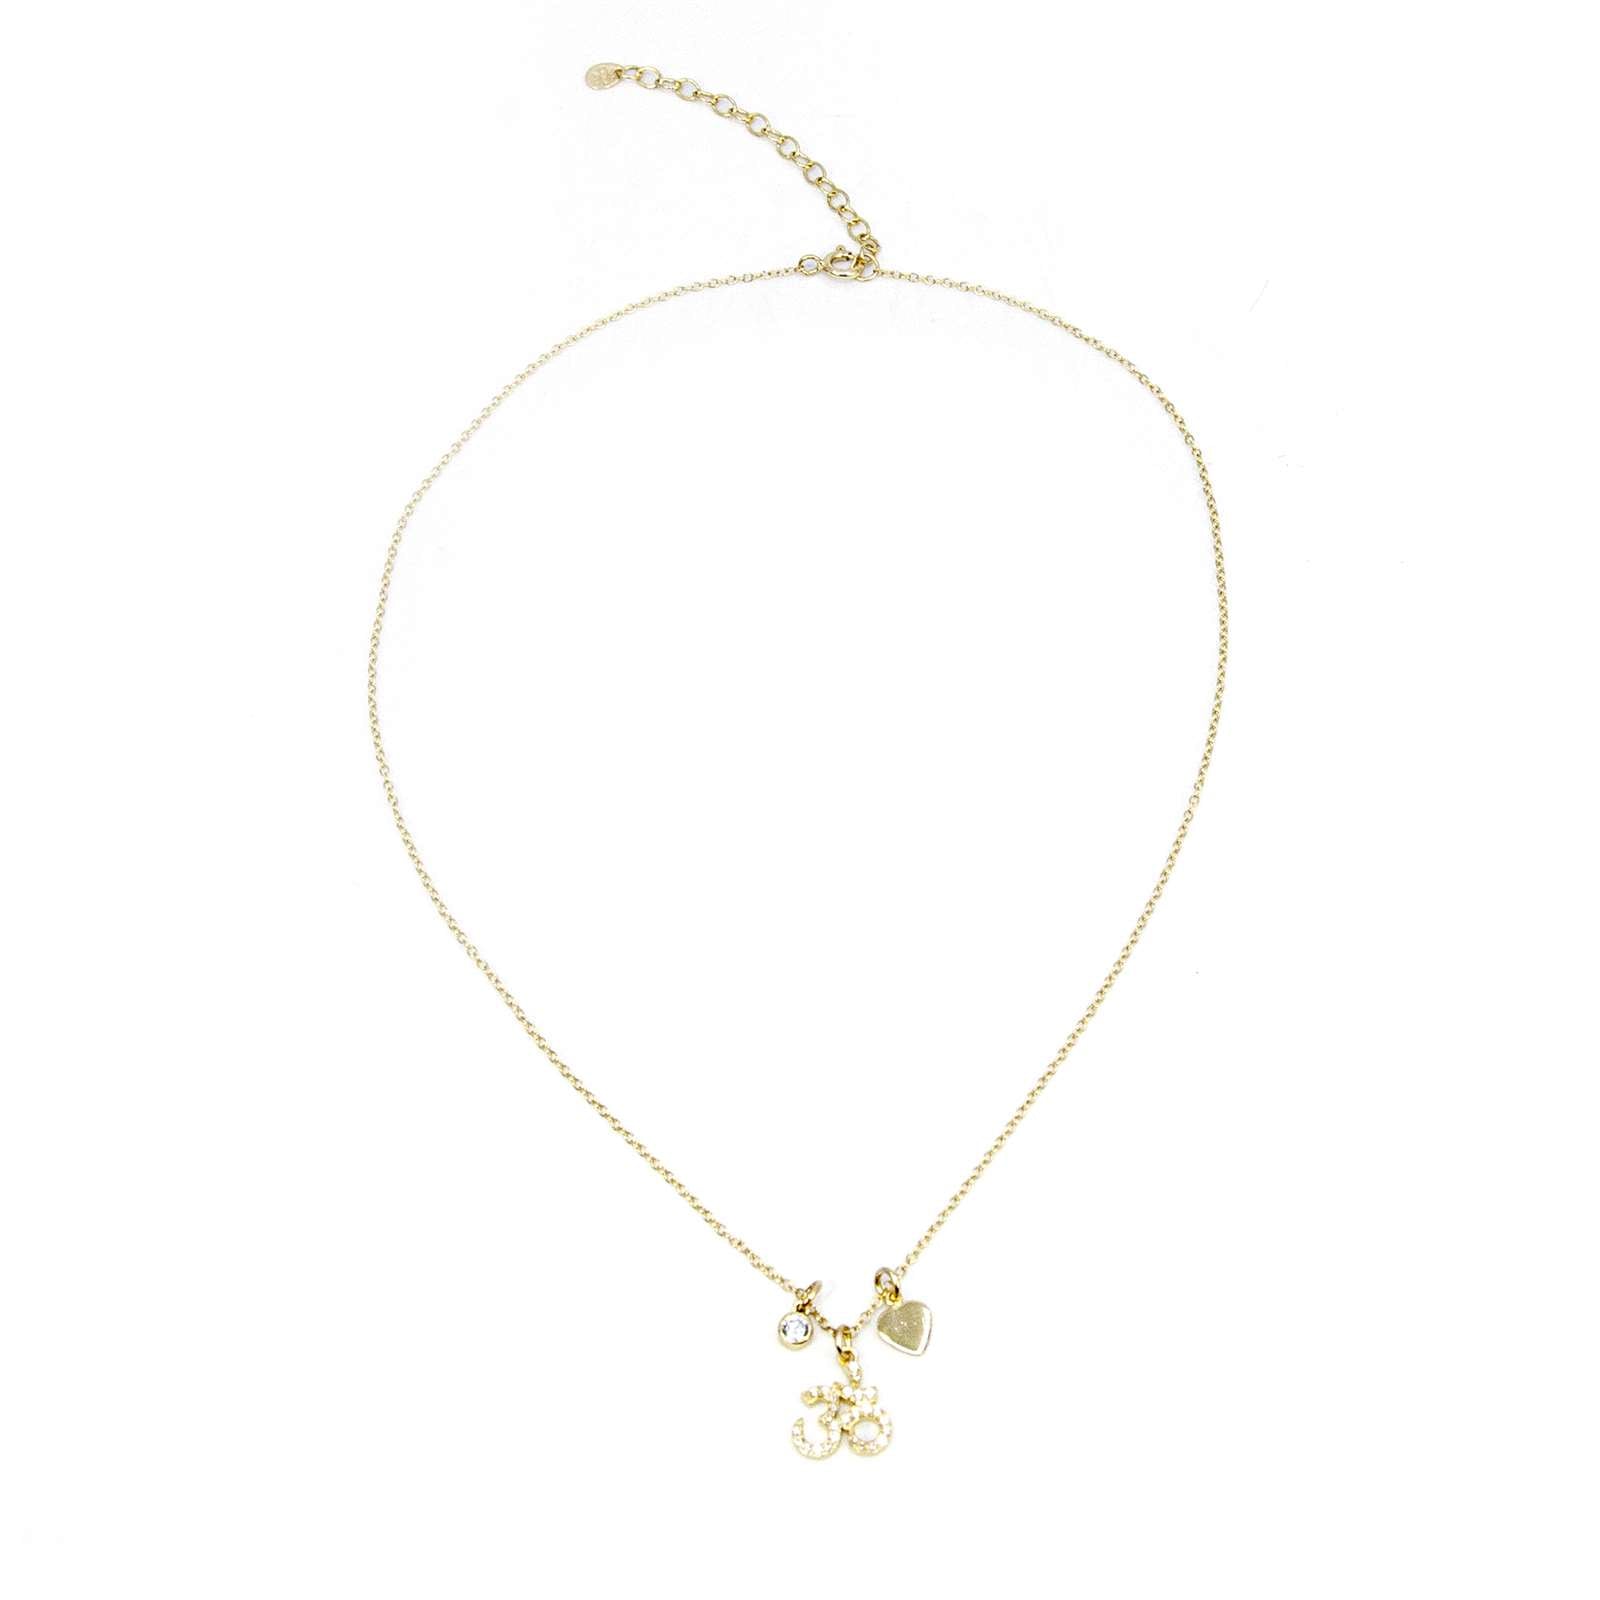 Athra Women Om Charm Necklace With Extension